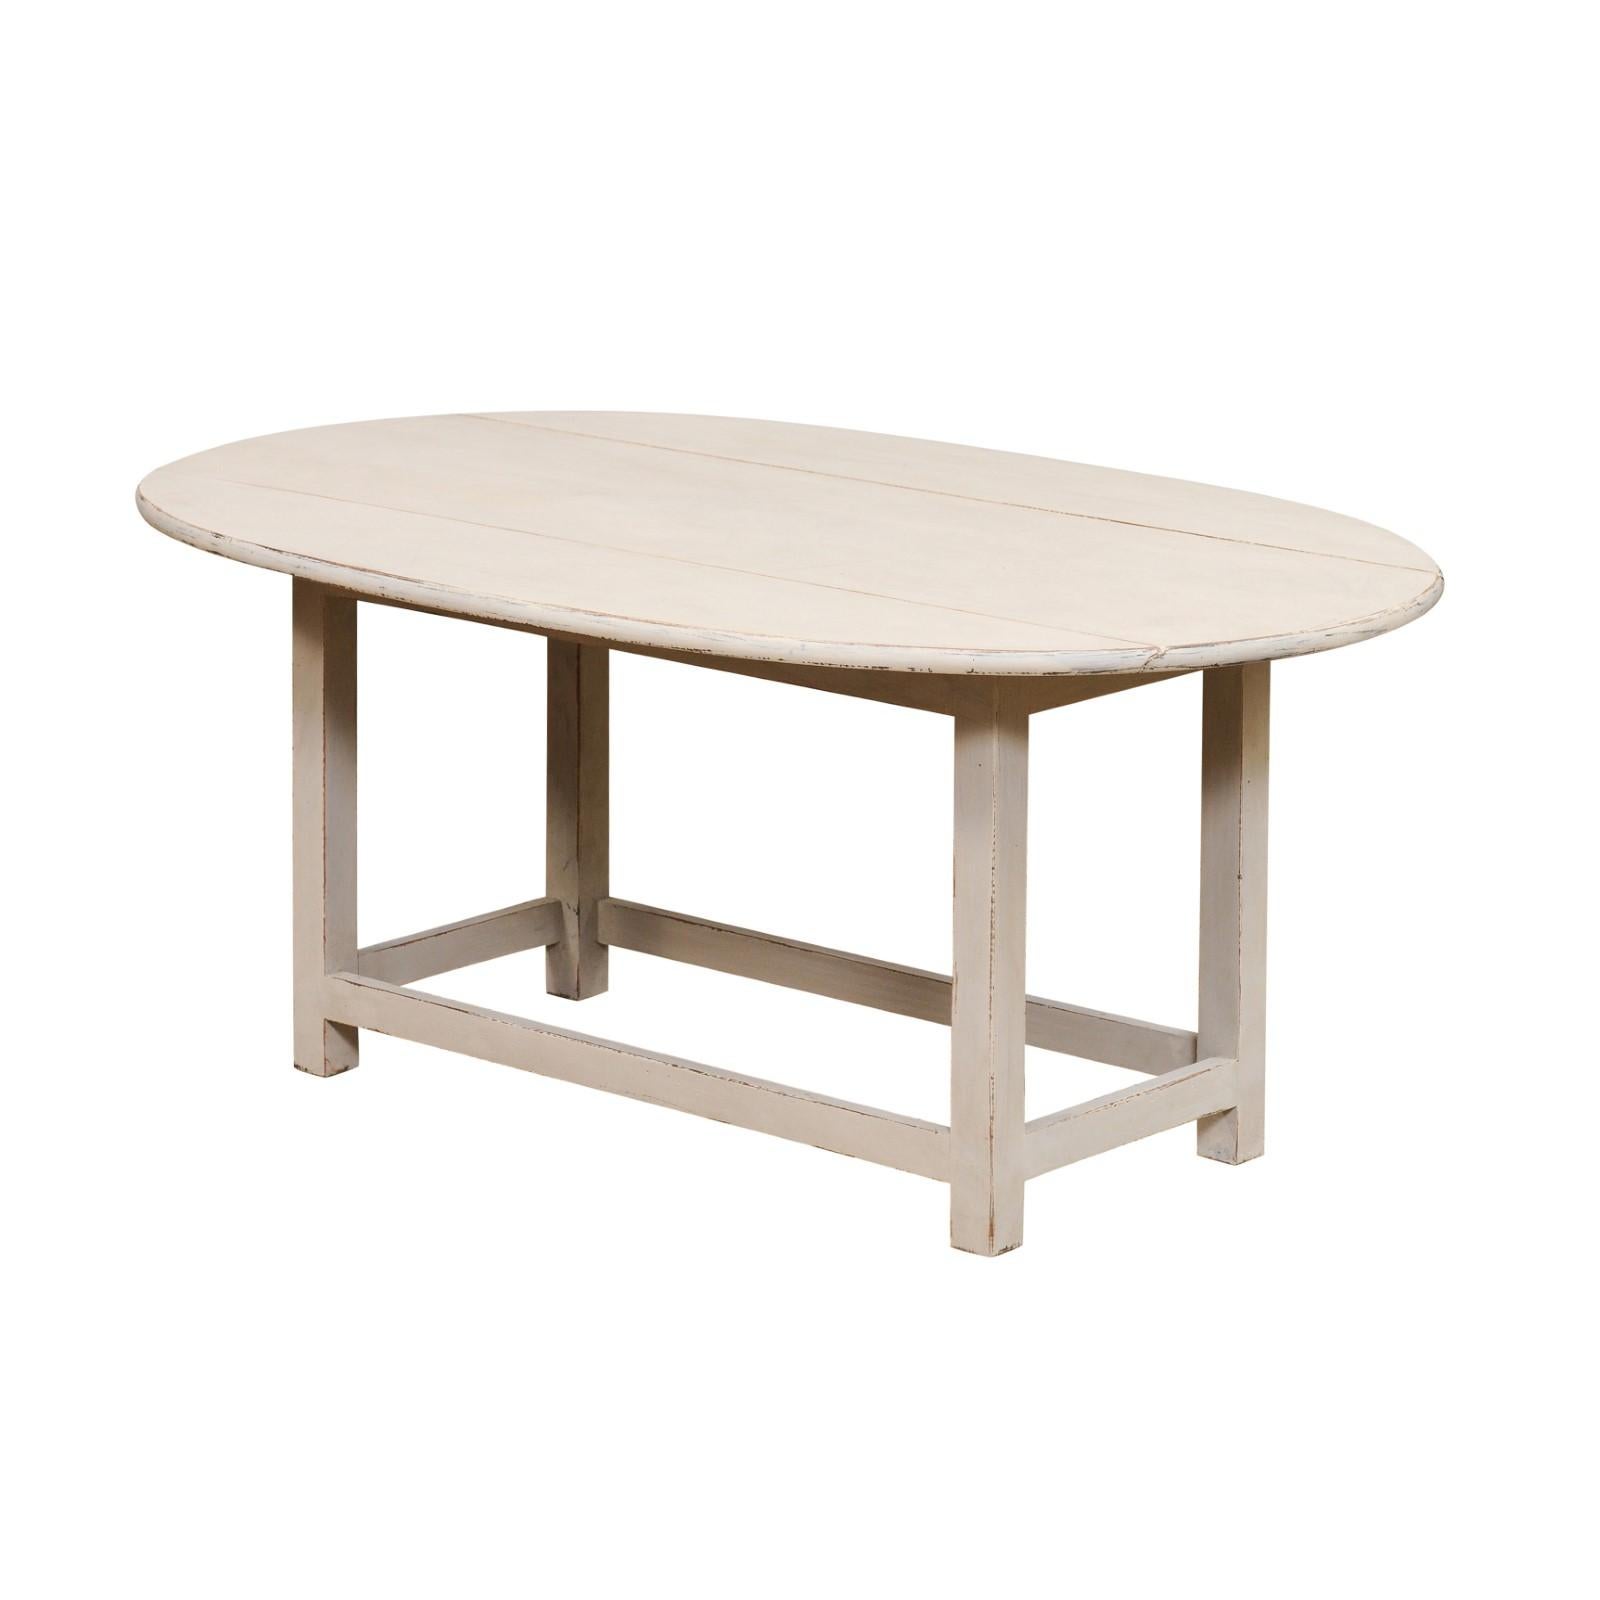 A Swedish oval painted coffee table with two drop leaves, straight legs and plain cross stretchers. Introducing a piece of Scandinavian charm, this Swedish oval painted coffee table with drop leaves, straight legs, and plain cross stretchers, dated